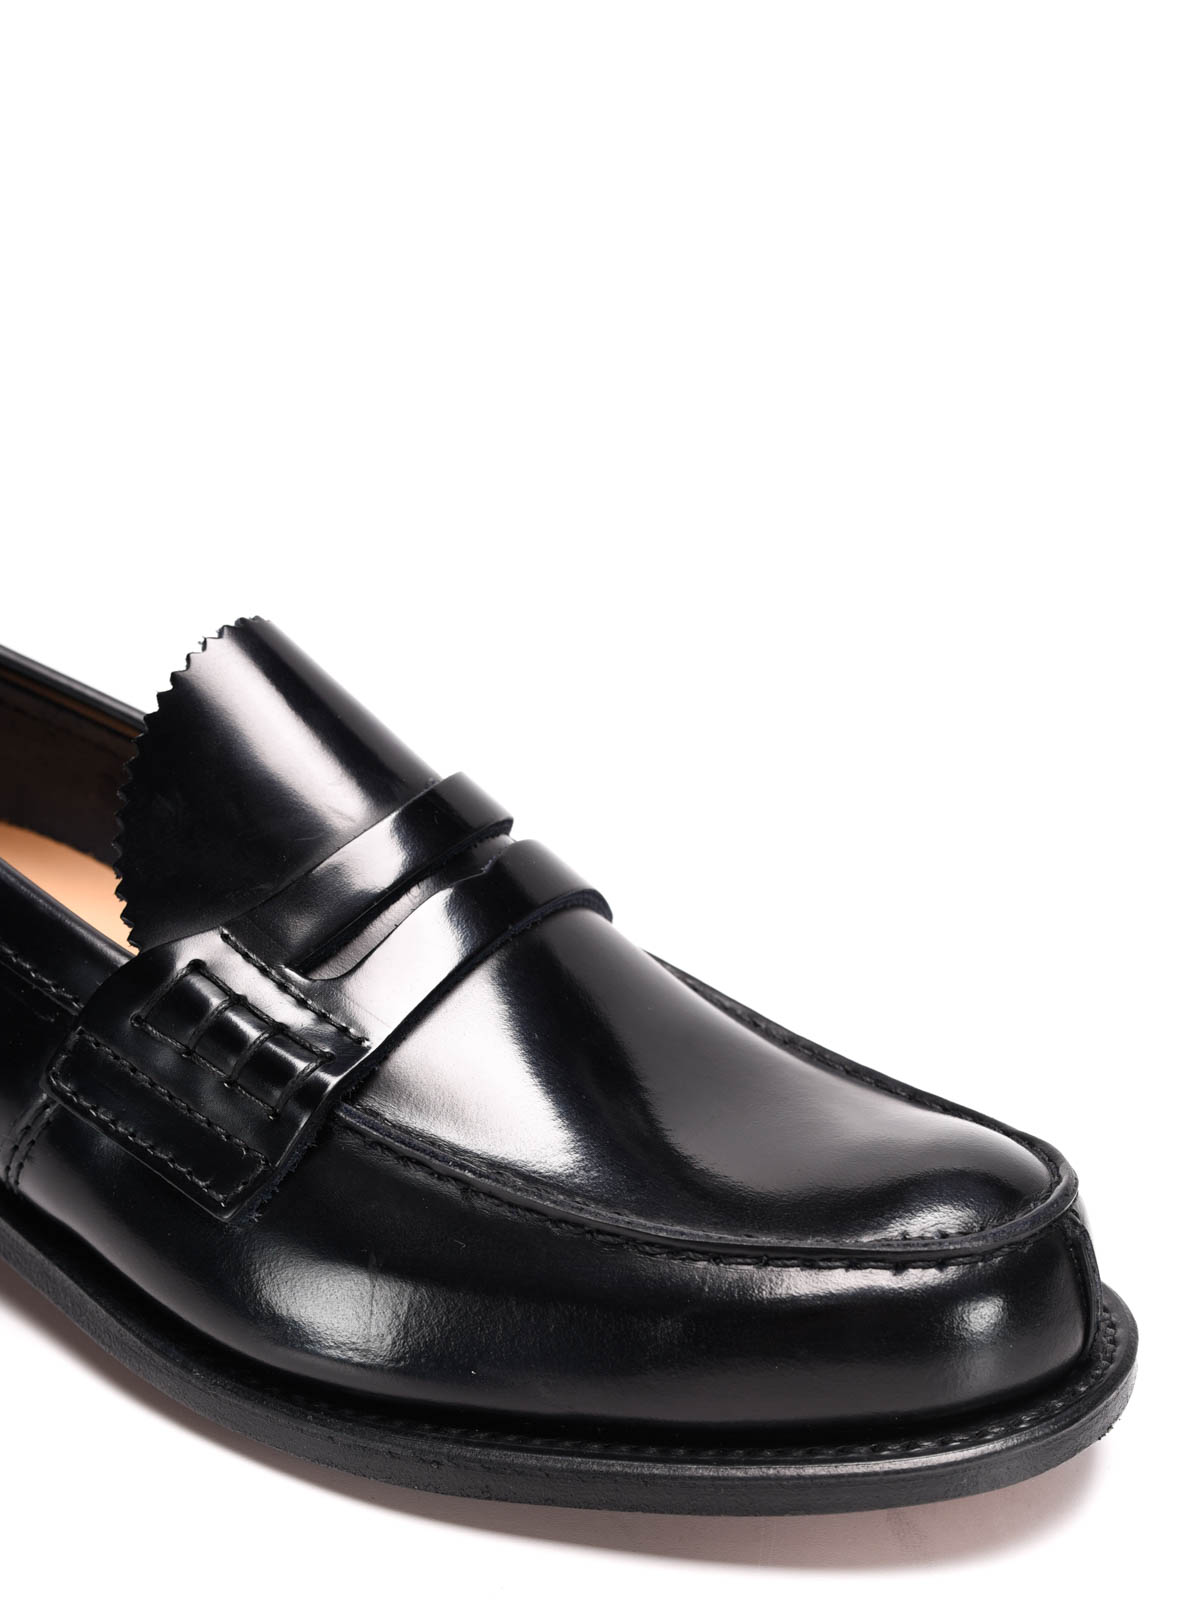 Loafers & Slippers Church's - Tunbridge leather loafers 